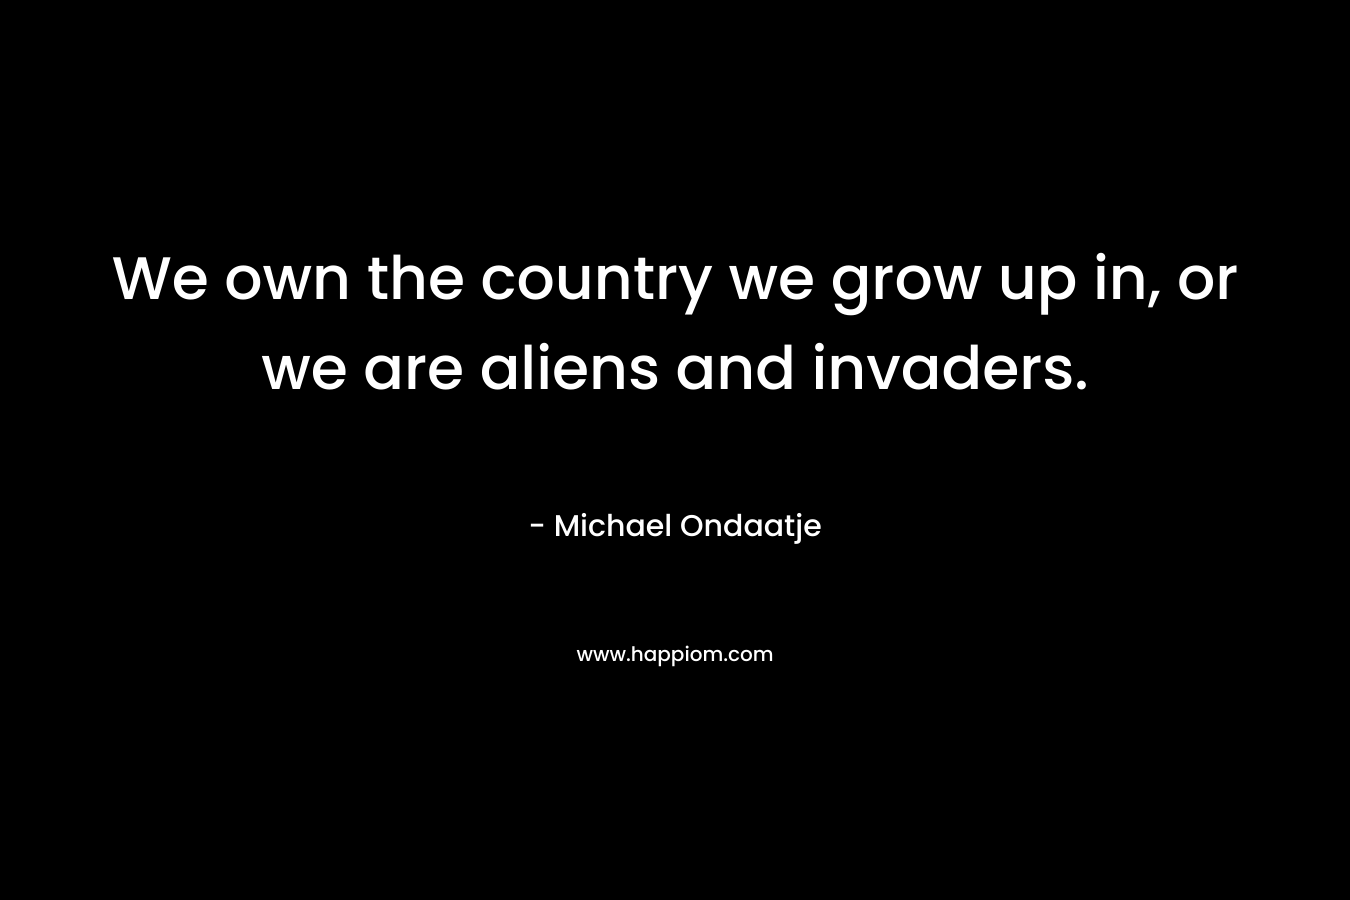 We own the country we grow up in, or we are aliens and invaders. – Michael Ondaatje